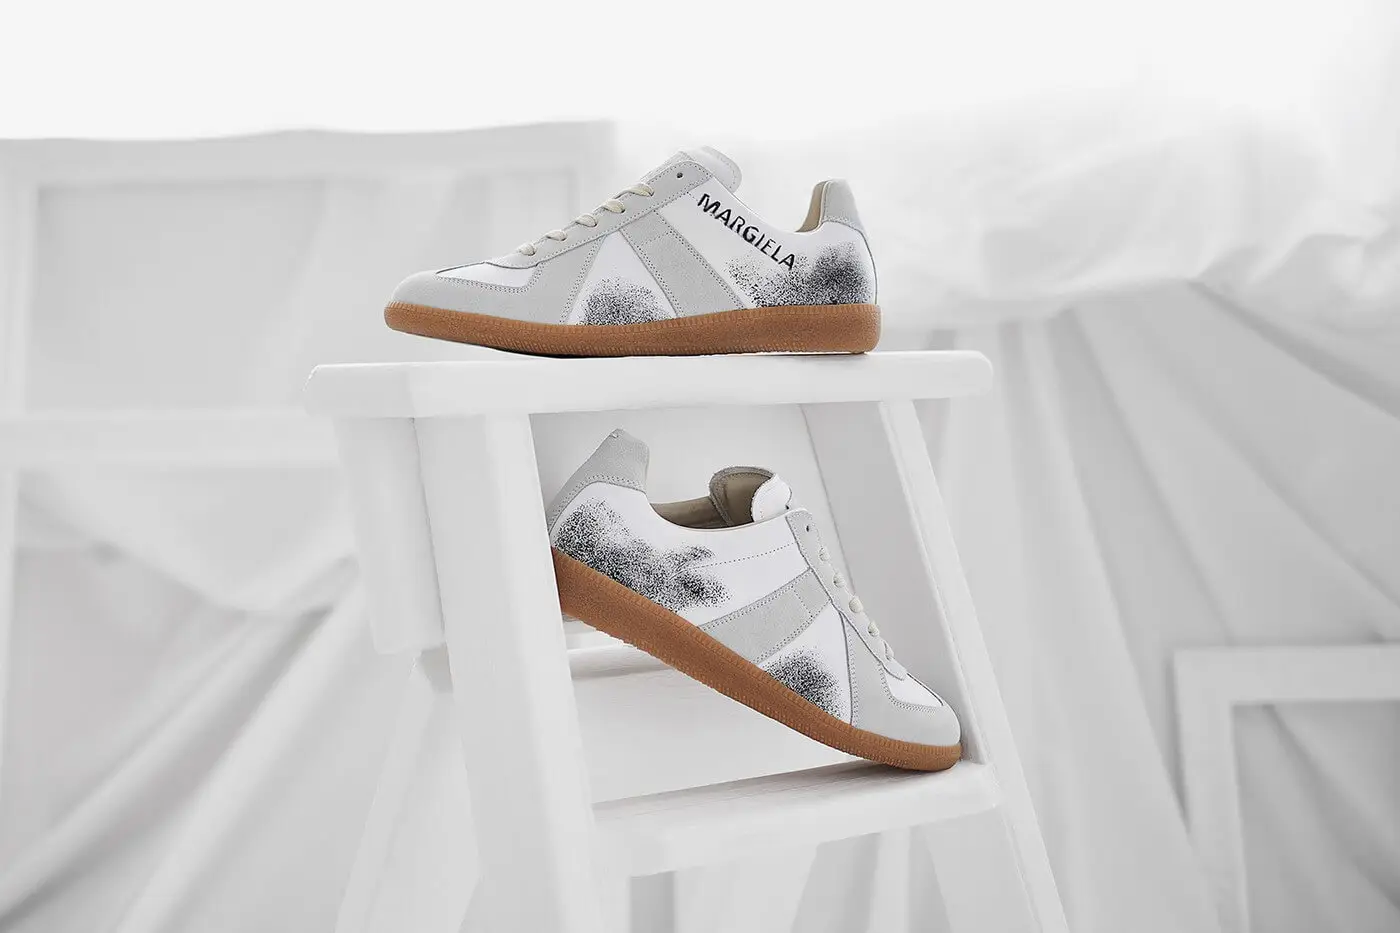 END. And Maison Margiela Adorn The 22 Replica Sneaker With 